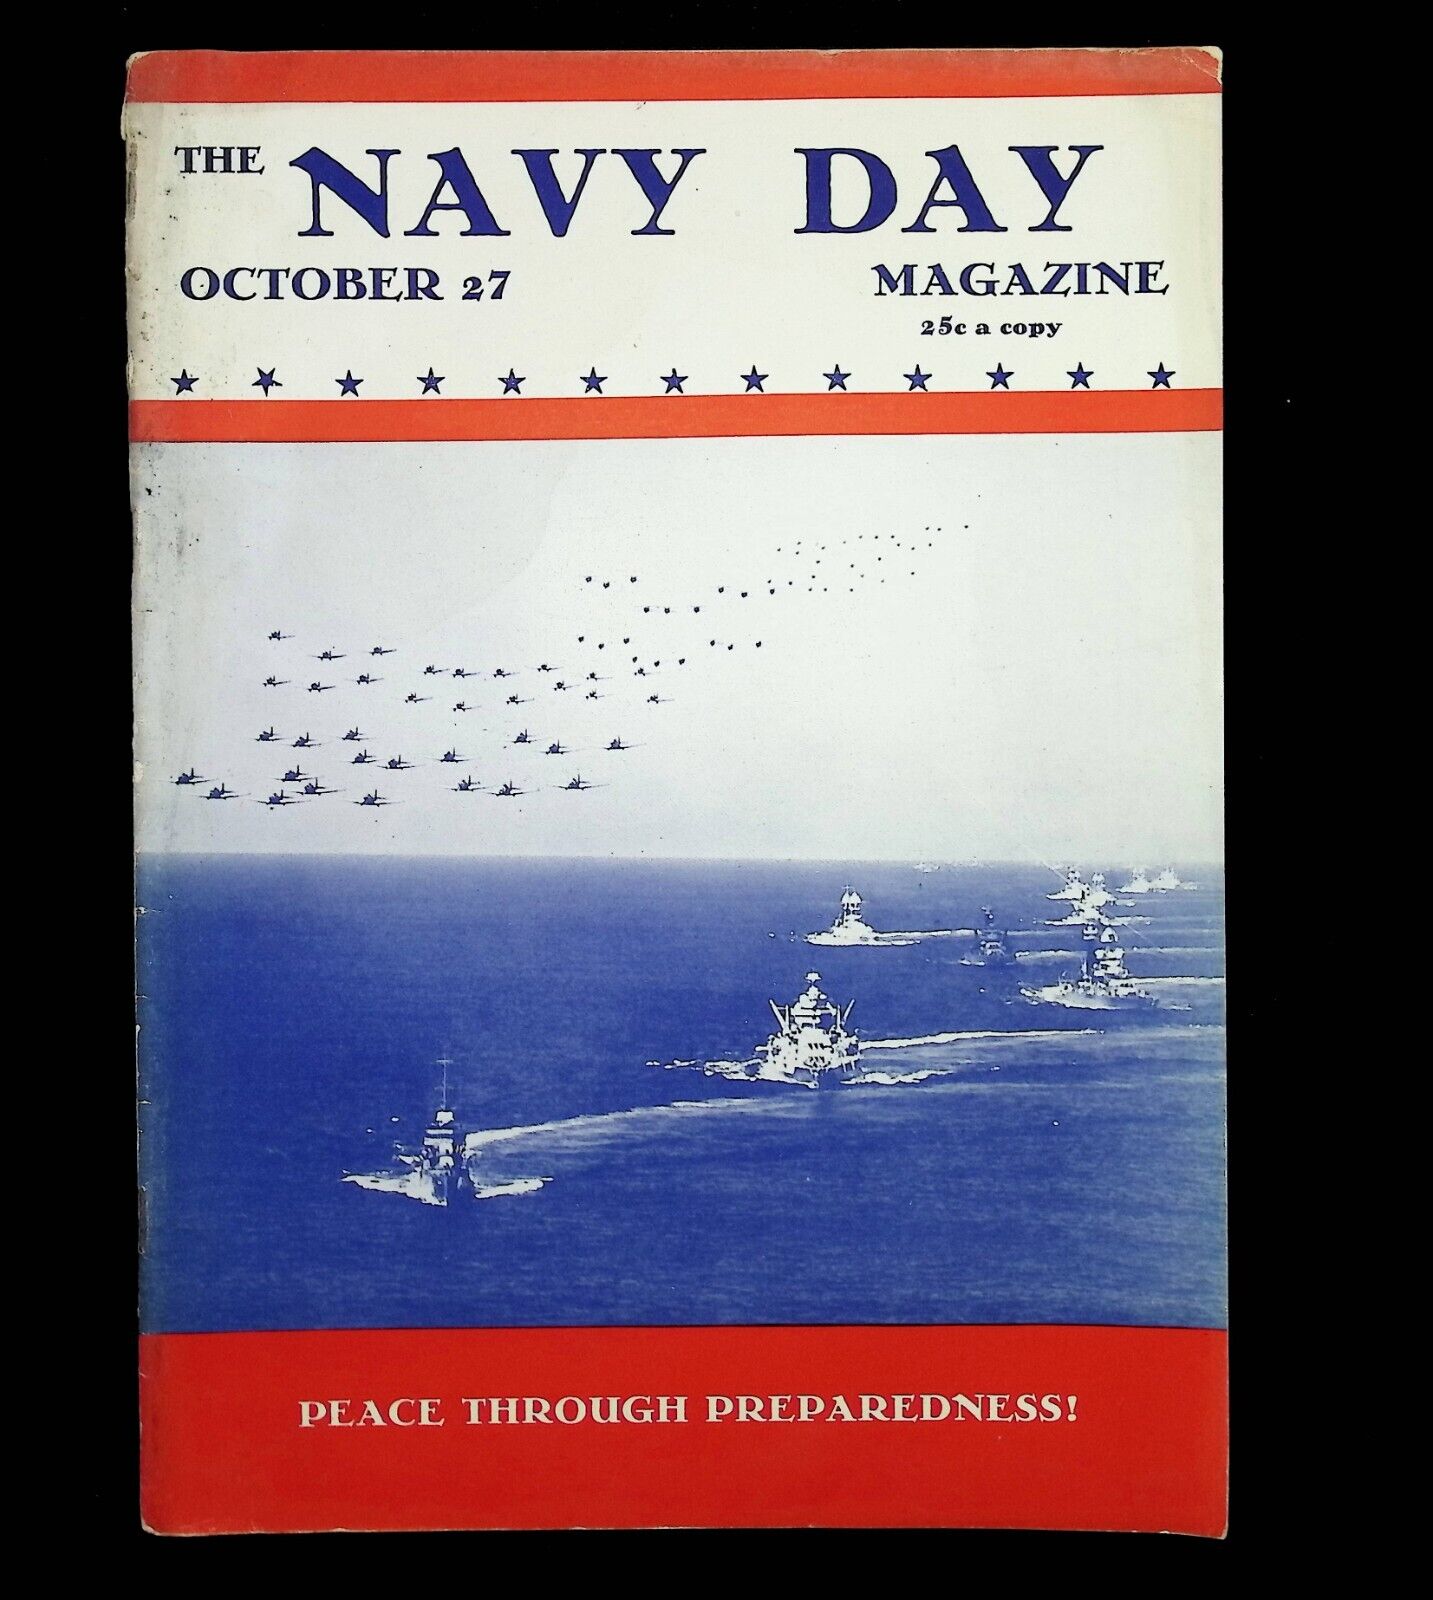 Rare October 27, 1940 NAVY DAY Magazine, Lot of Photos and Advertisements